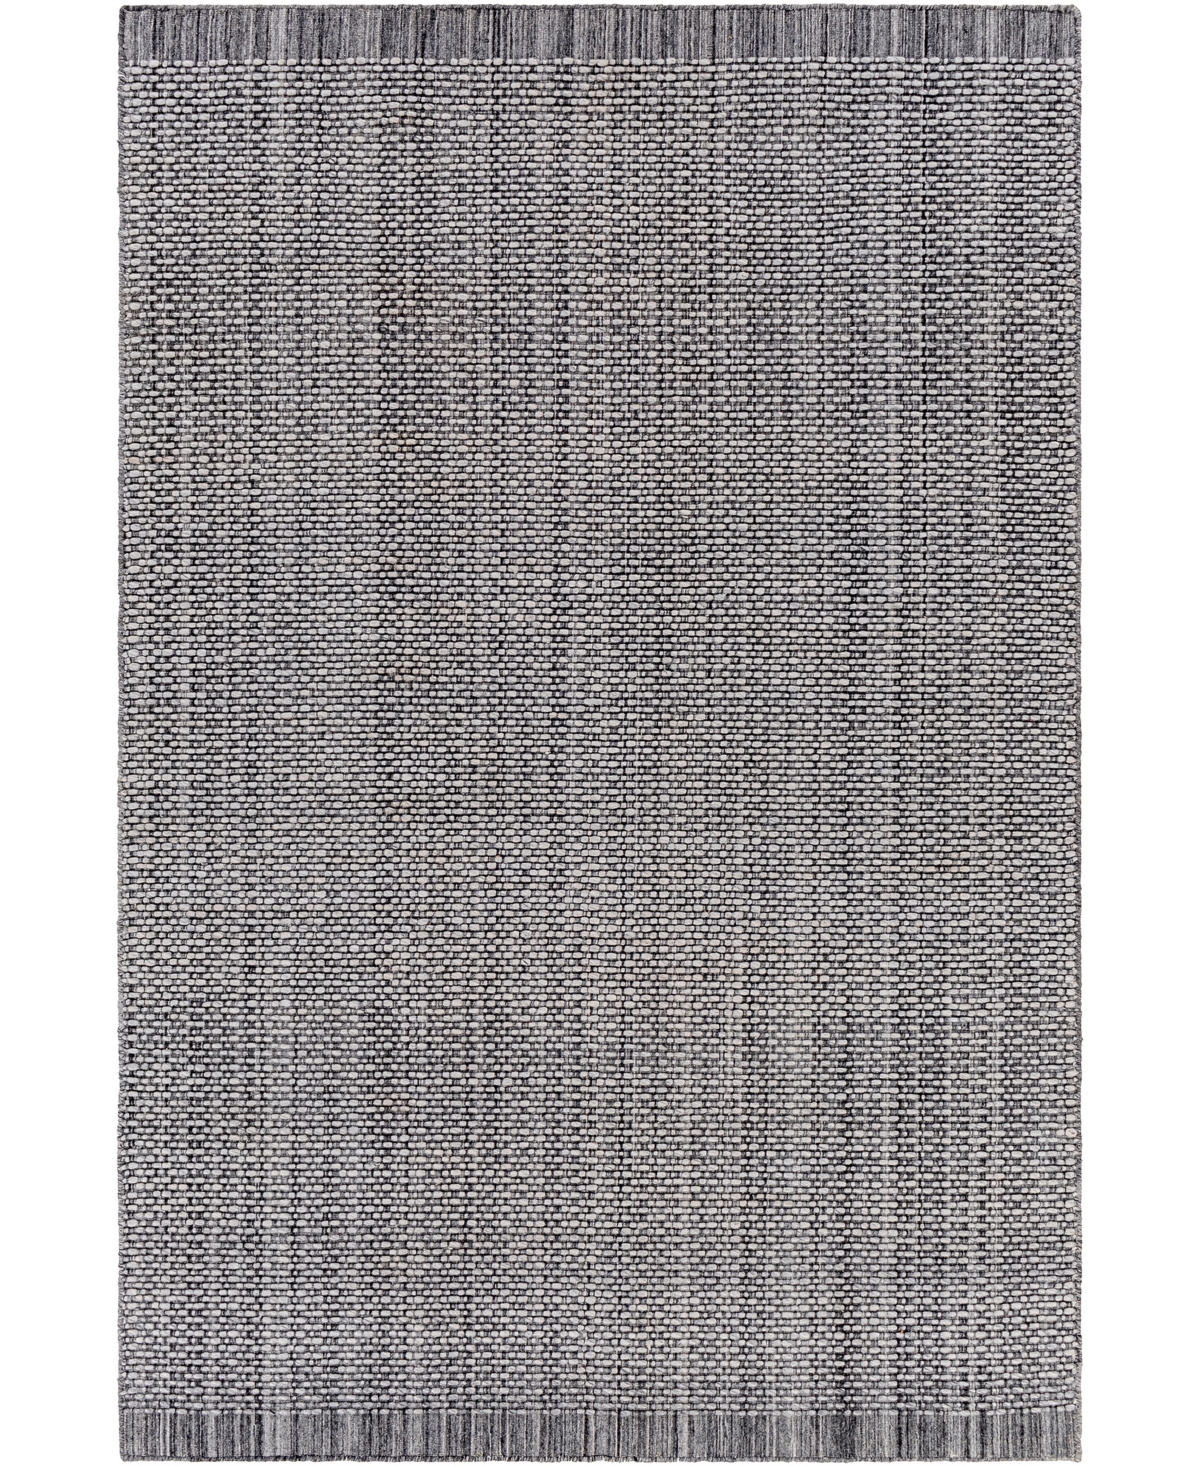 Surya Sycamore Syc-2303 8in x 10' Outdoor Area Rug - Charcoal